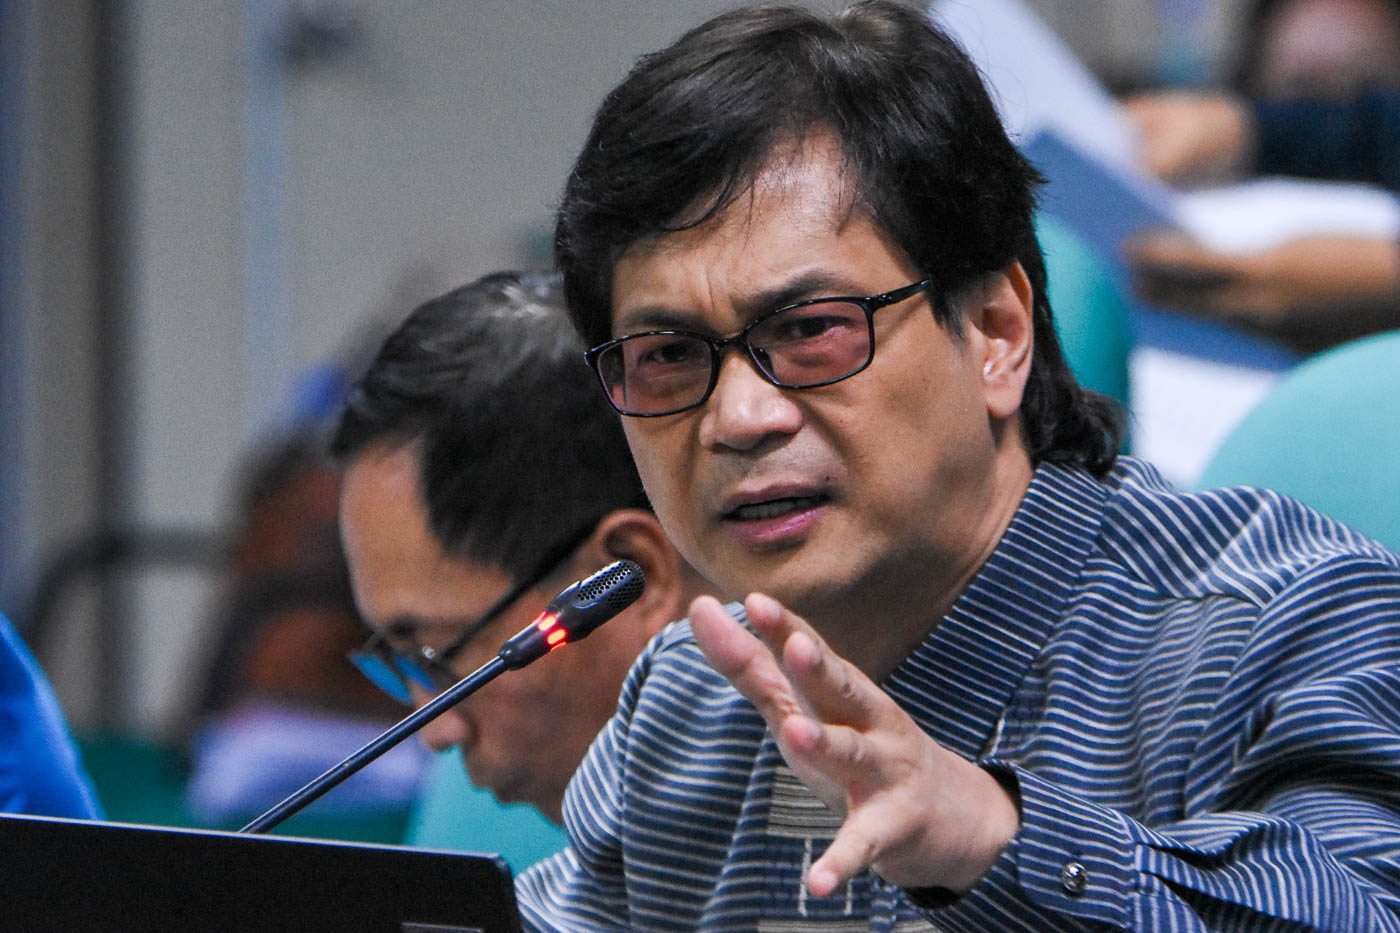 10 generals, colonels did not submit courtesy resignation – Abalos